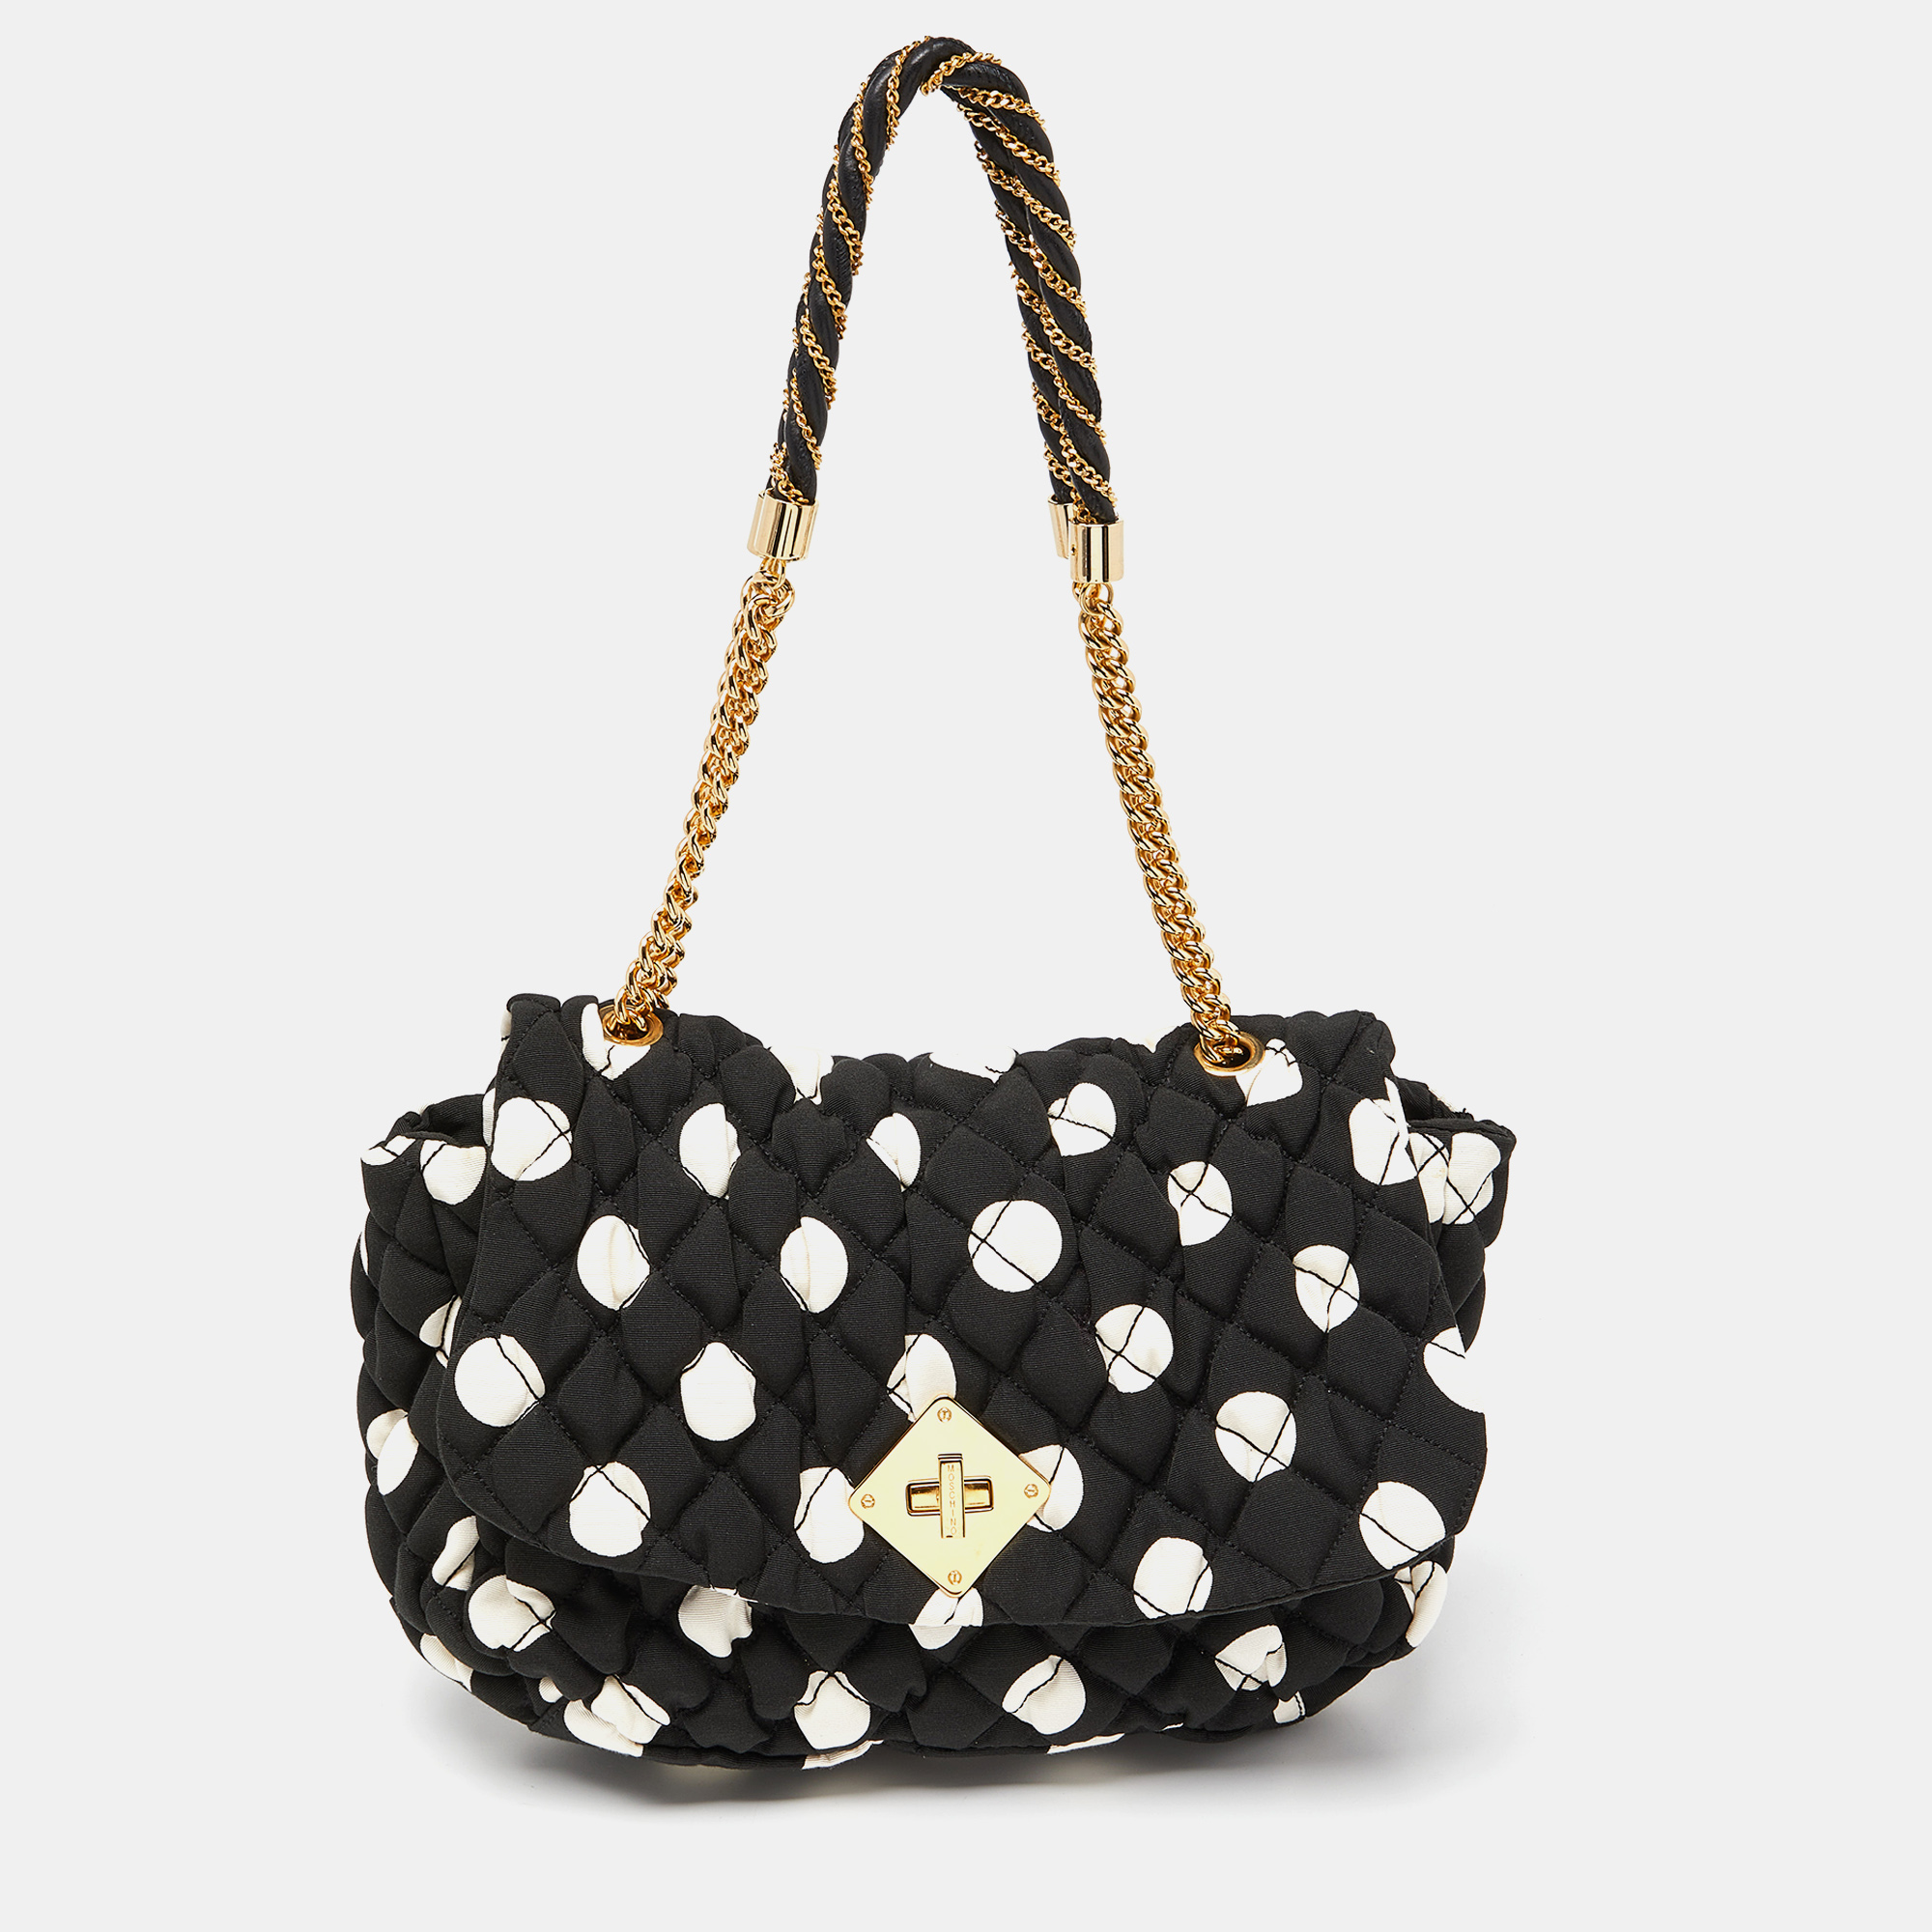 Moschino Black/White Quilted Polka Dots Canvas Flap Shoulder Bag